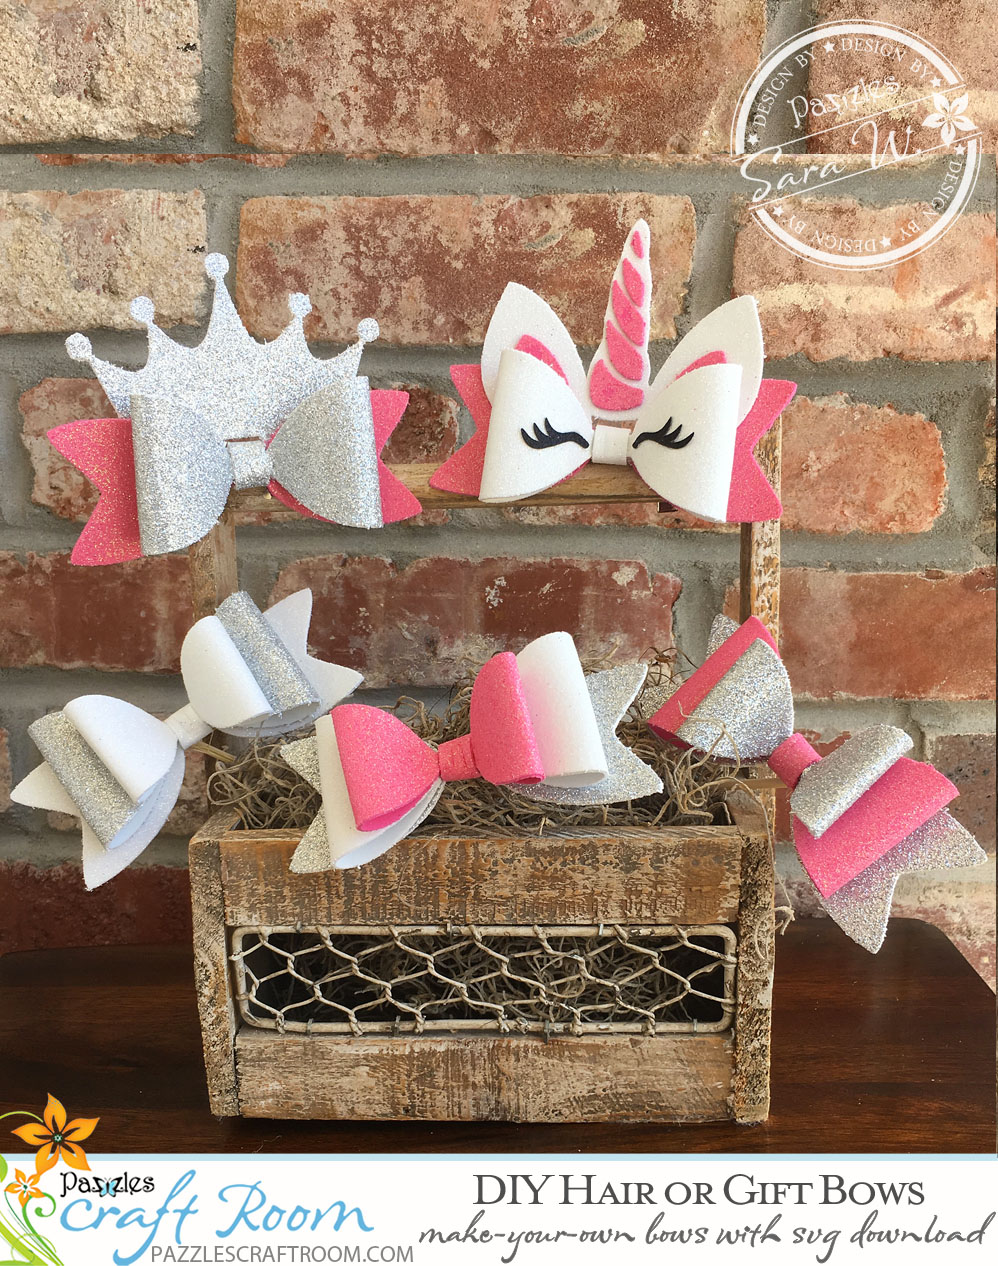 Pazzles DIY Bows for Hair or Gifts. Cut in Paper, Felt, Foam or Faux Leather. Instant SVG download compatible with Pazzles Inspiration, Cricut, and Silhouette Cameo. Project by Sara Weber.